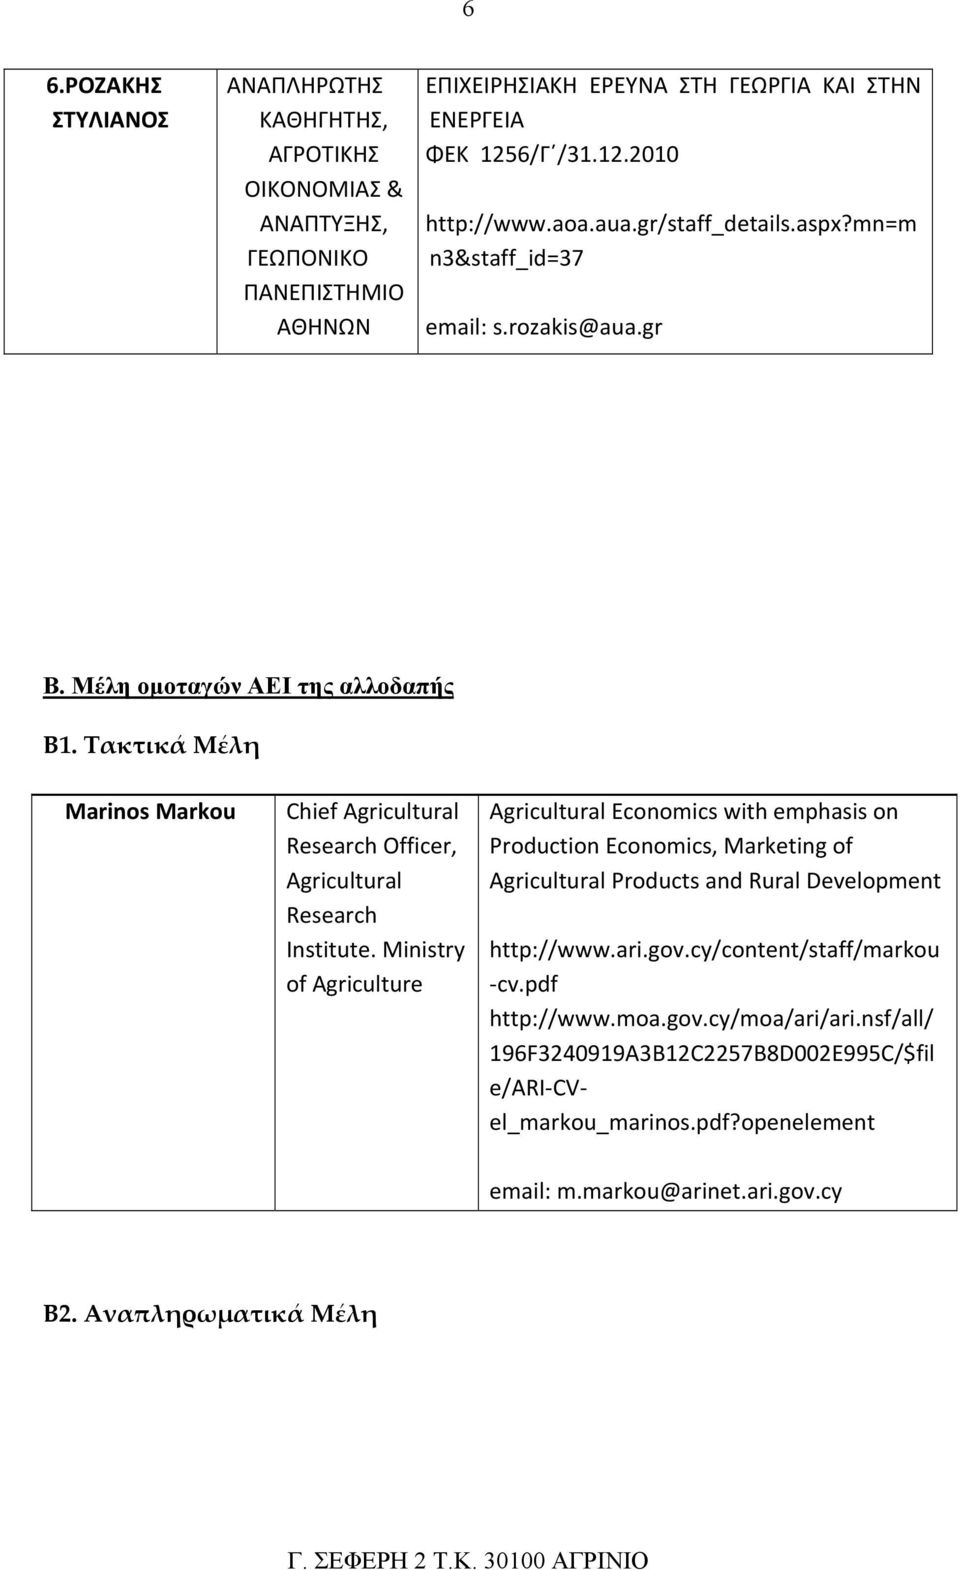 Ministry of Agriculture Agricultural Economics with emphasis on Production Economics, Marketing of Agricultural Products and Rural Development http://www.ari.gov.